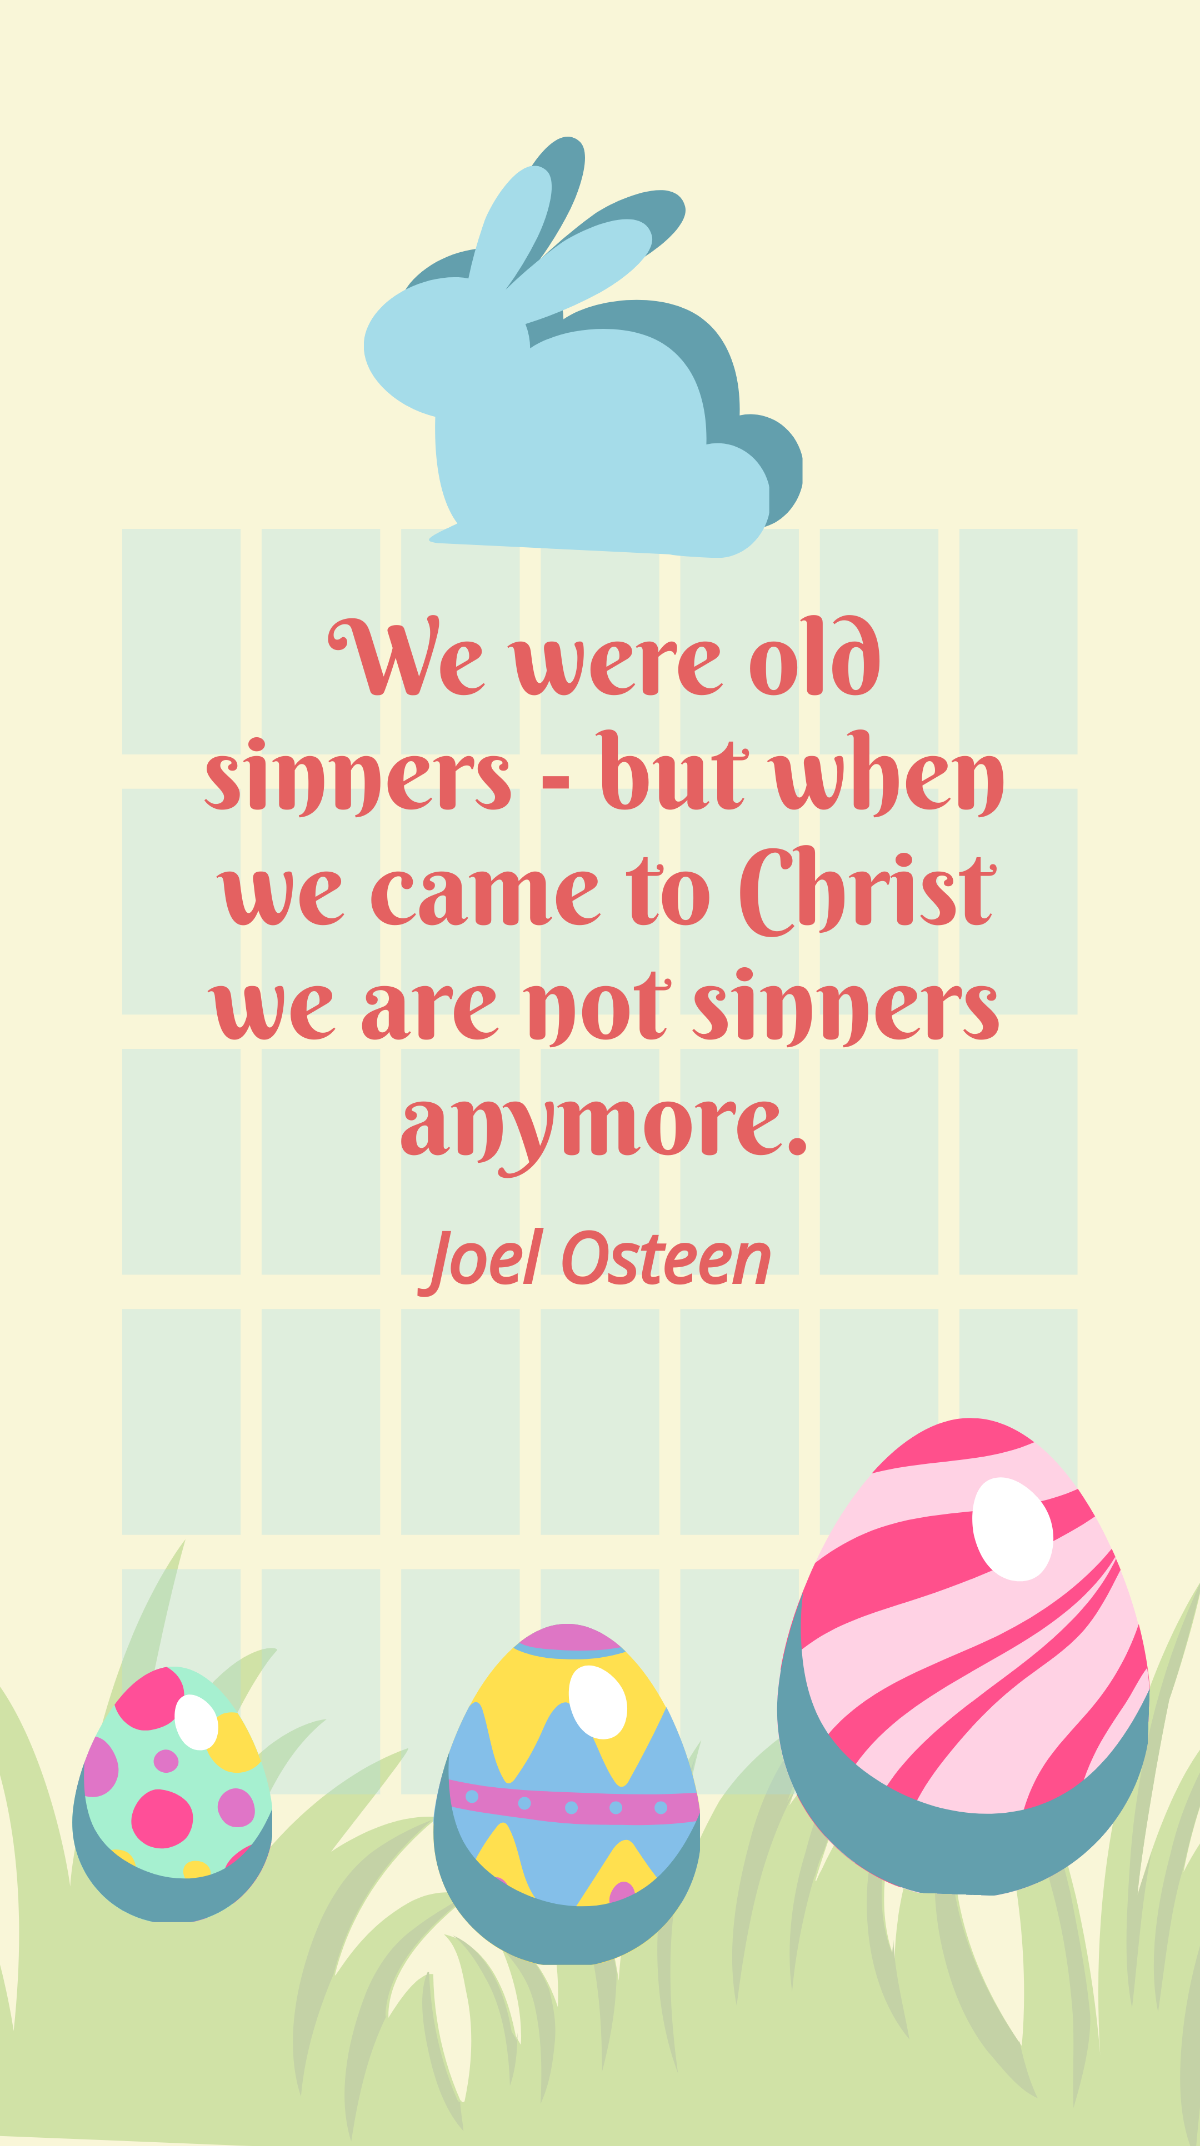 Joel Osteen - We were old sinners - but when we came to Christ we are not sinners anymore. Template